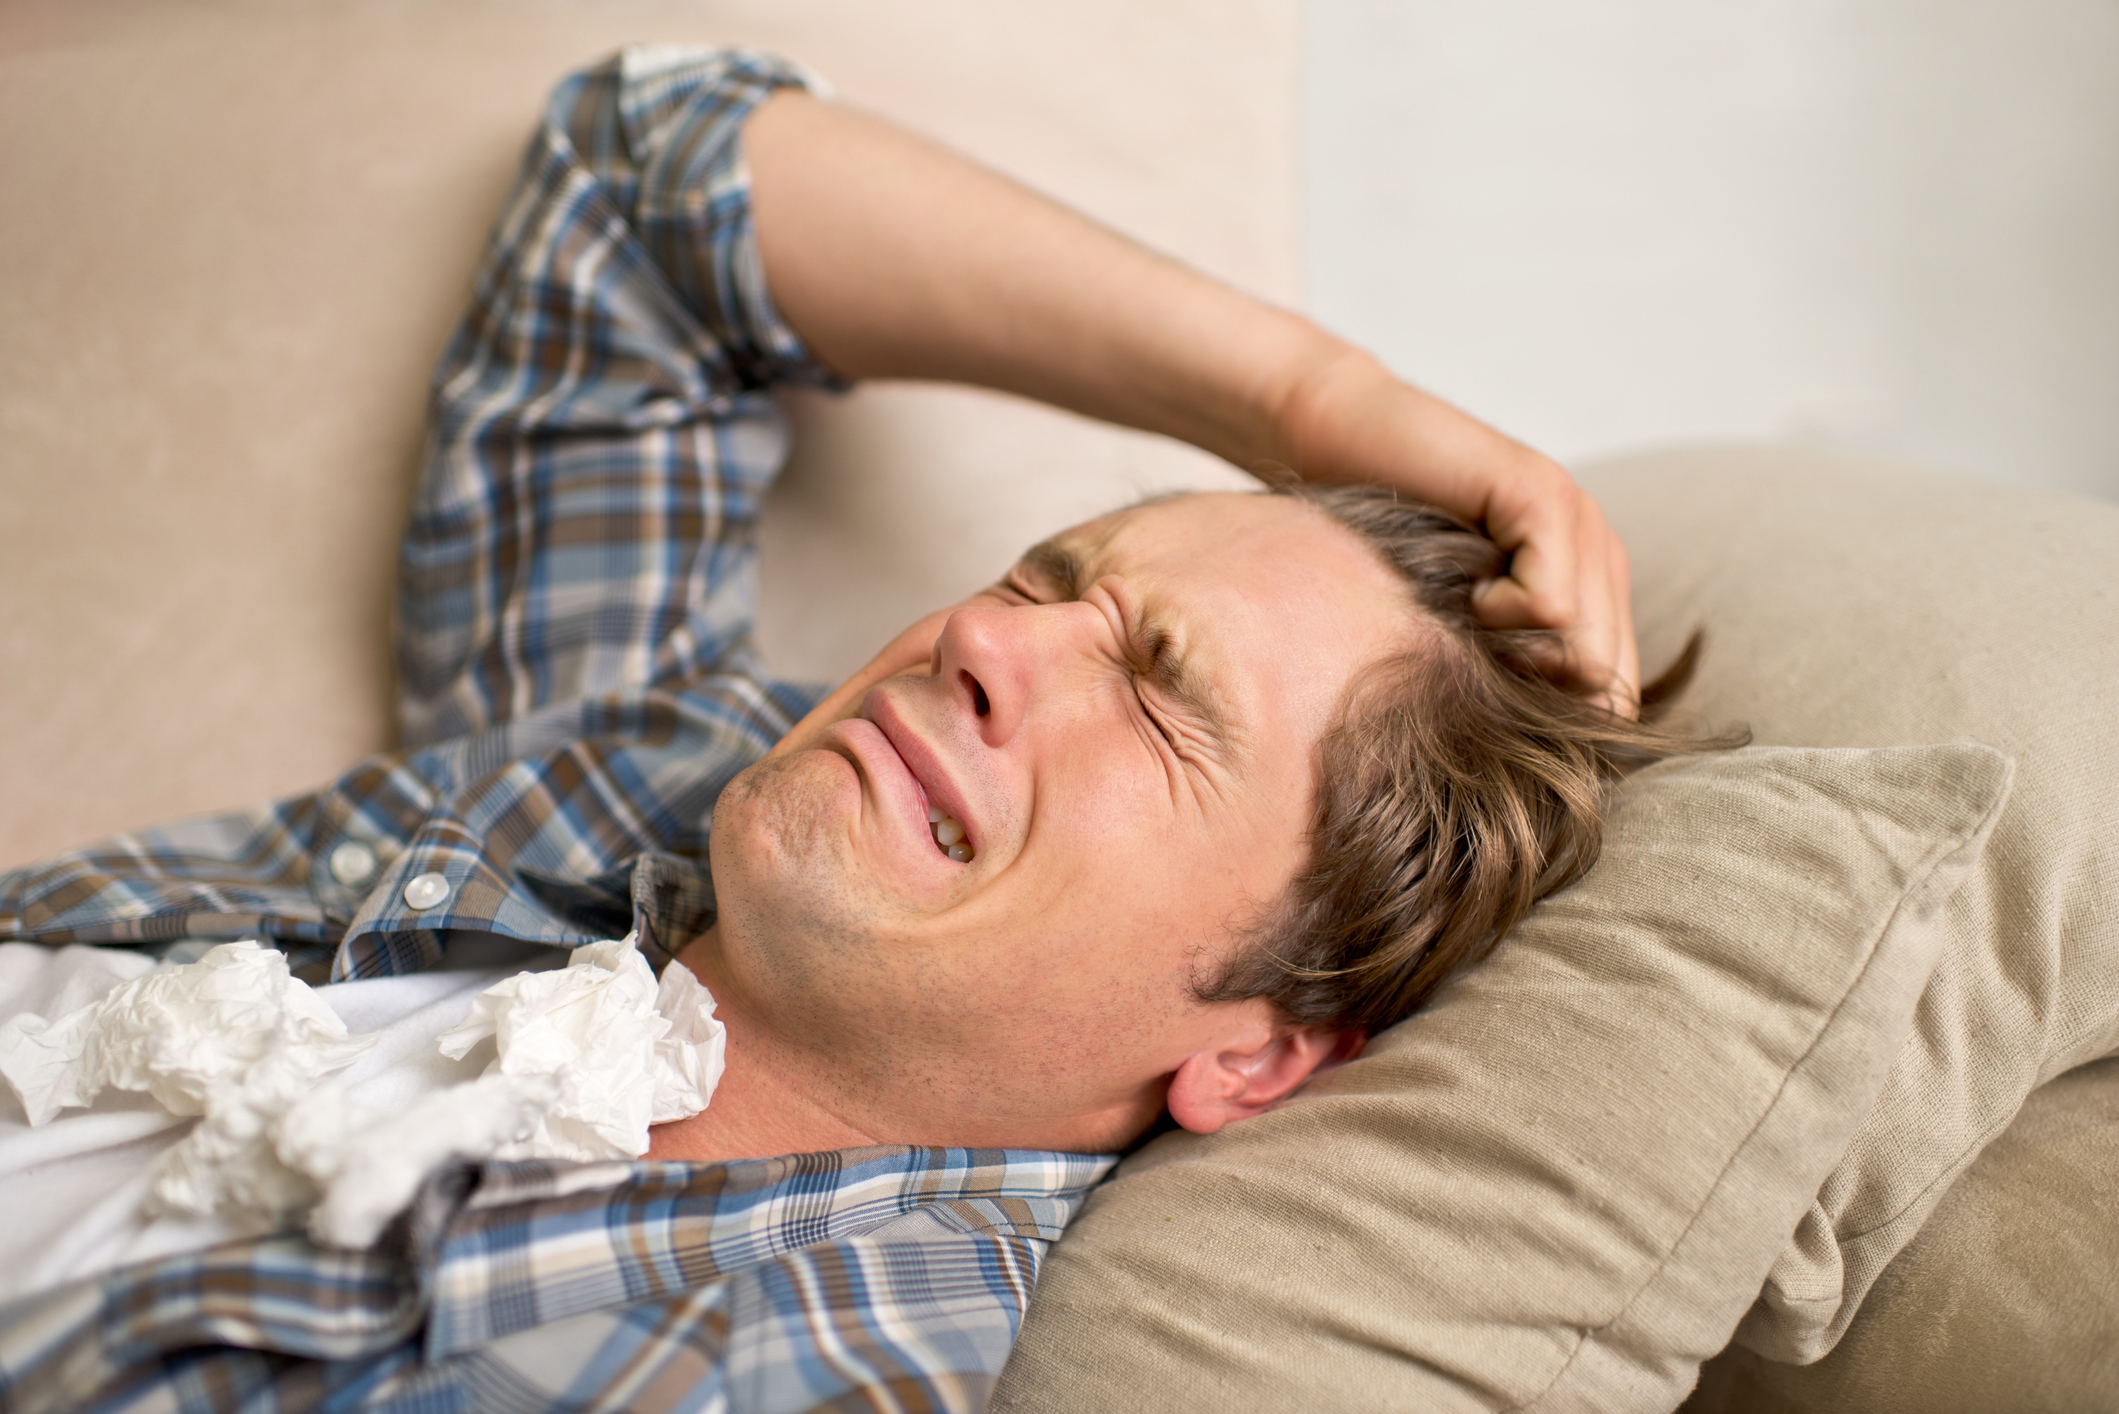 Person lying on a couch appearing to be ill with tissues nearby